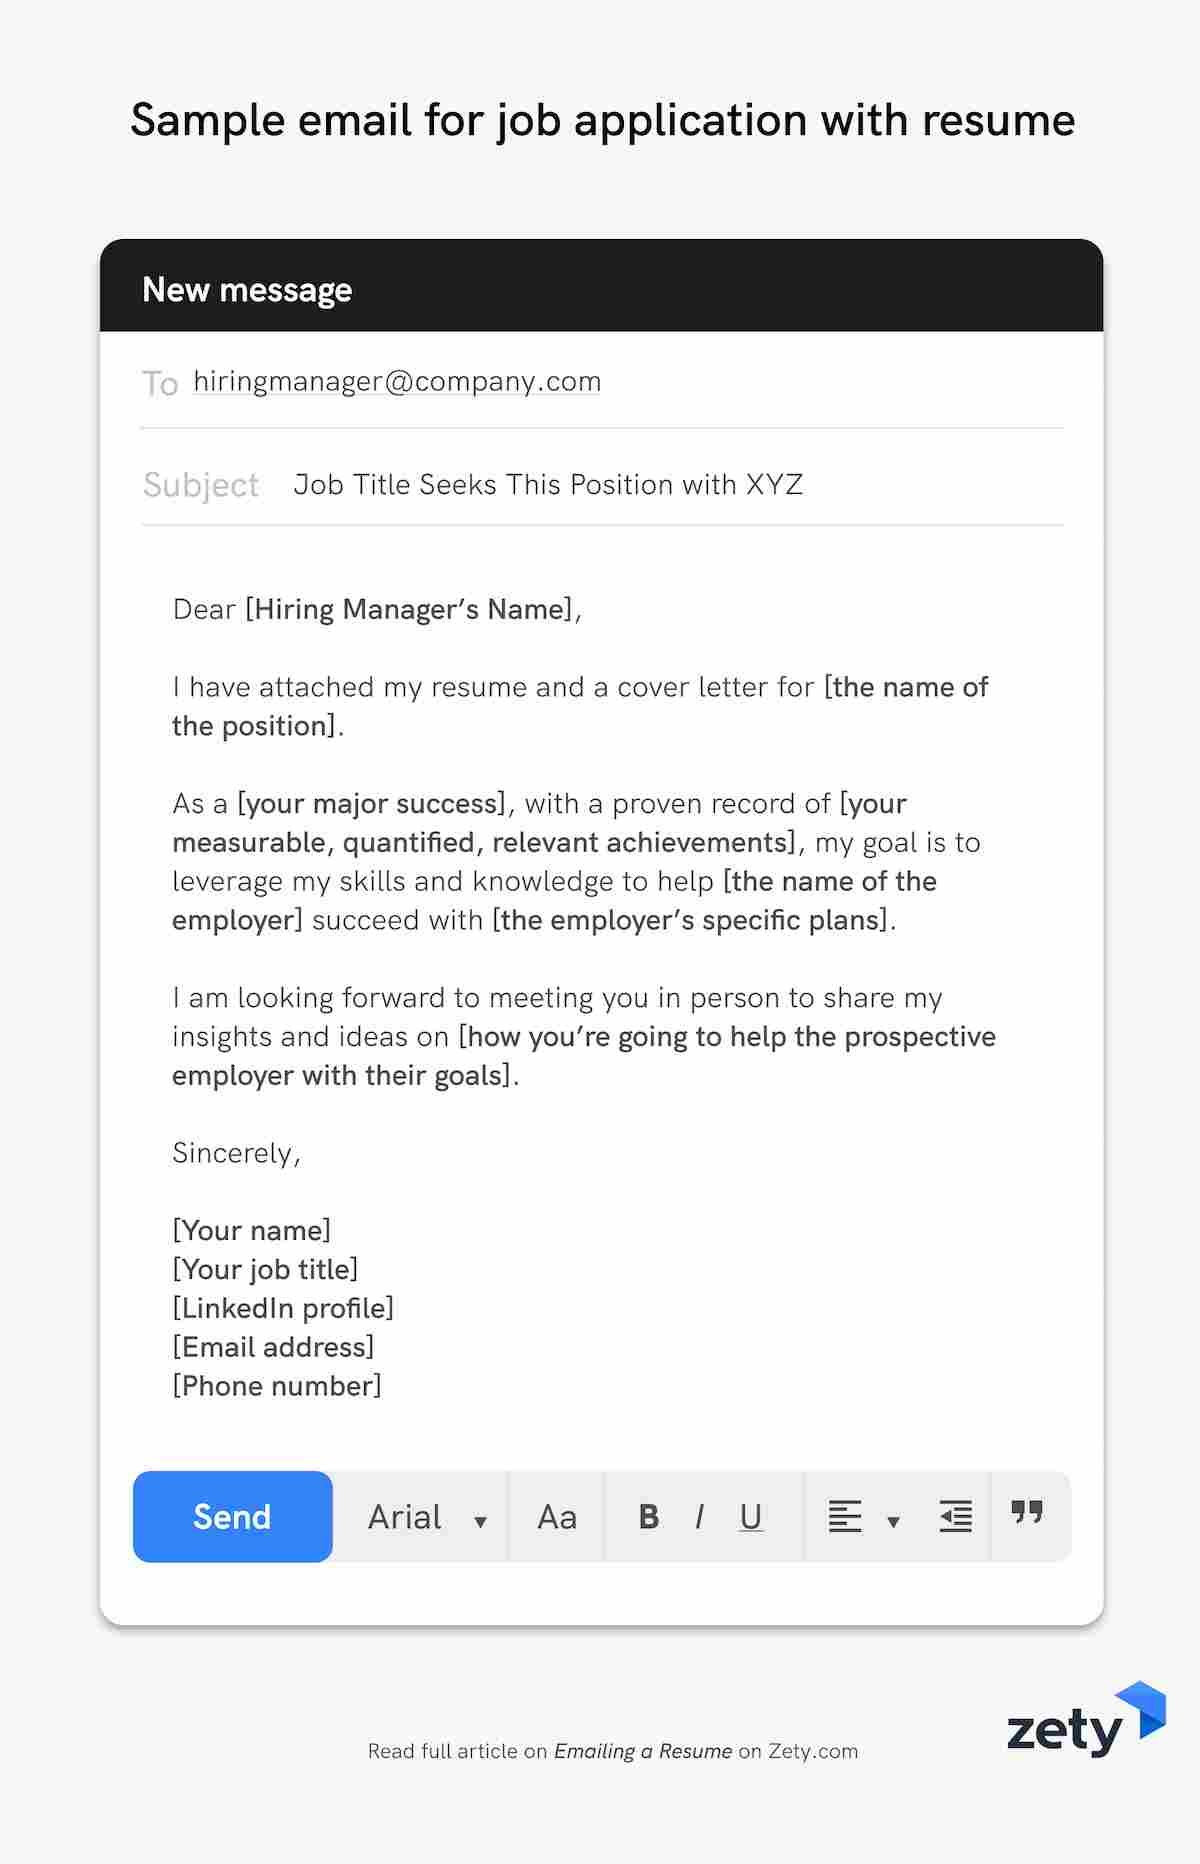 Sample Email for Job Application with Resume for Fresher How to Email A Resume to An Employer: 12lancarrezekiq Email Examples